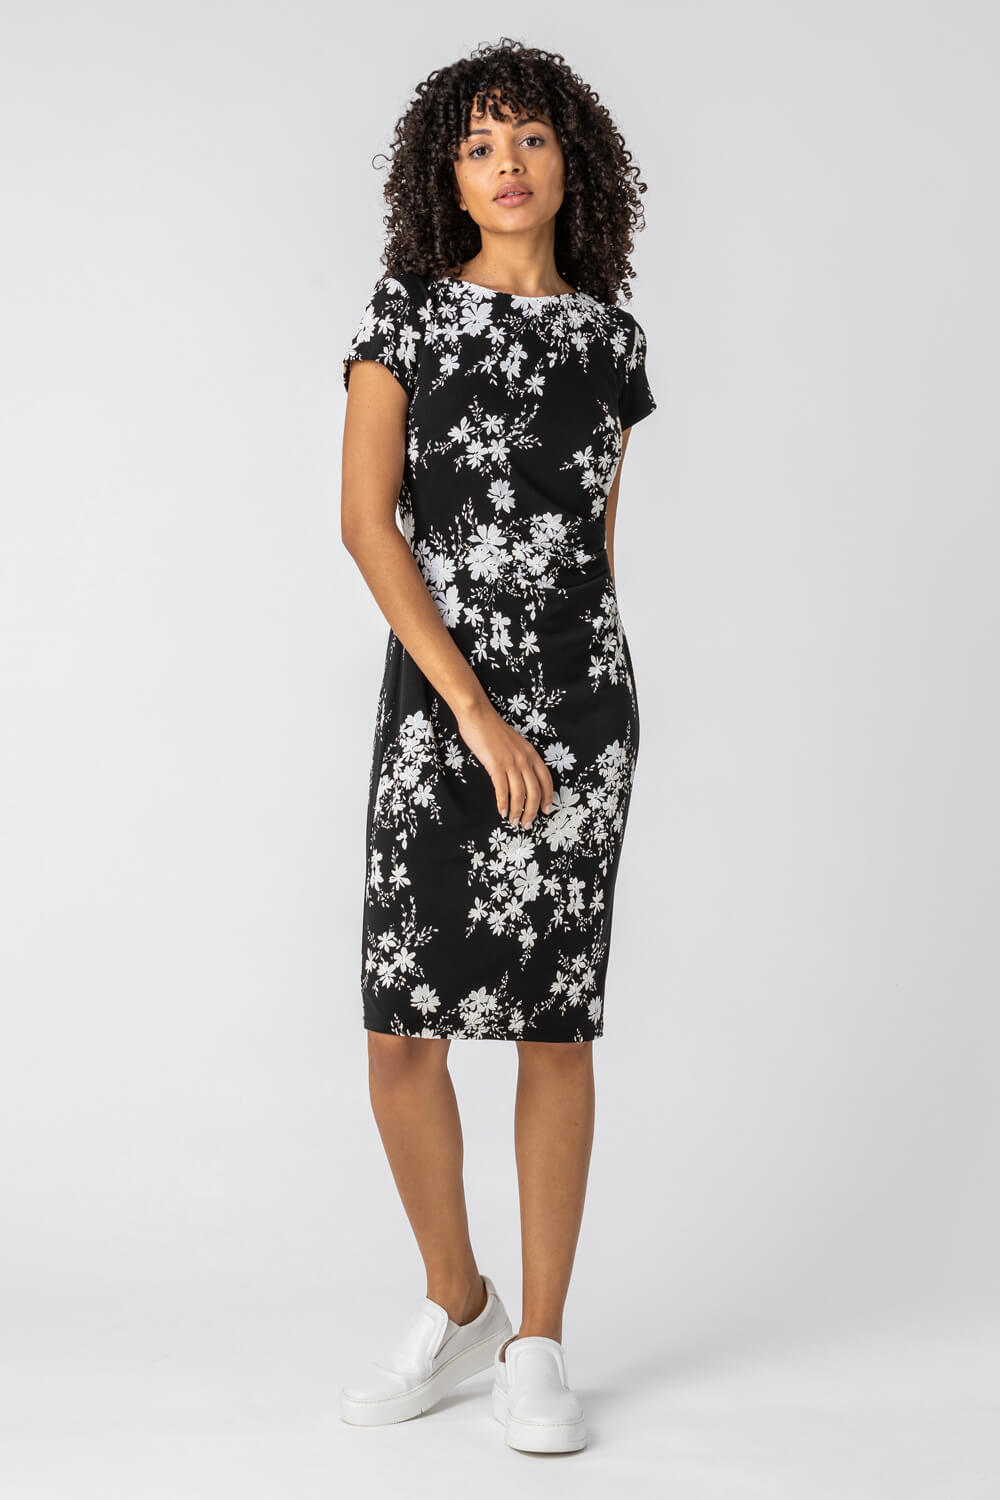 Black Floral Puff Print Side Ruched Dress, Image 3 of 4